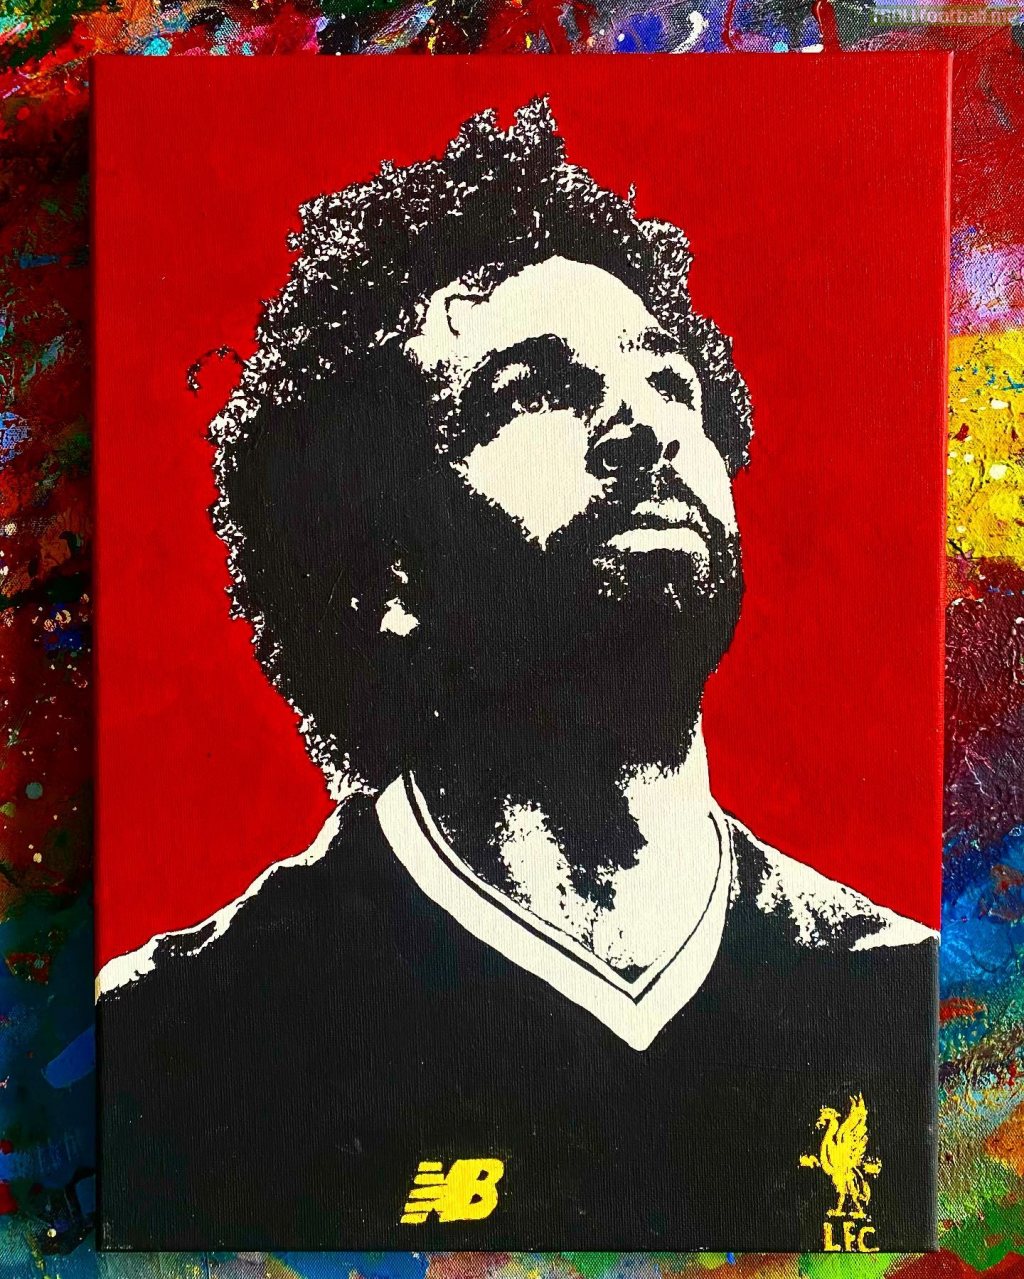 Artist from Ireland. Here's my painting of Mohamed Salah.